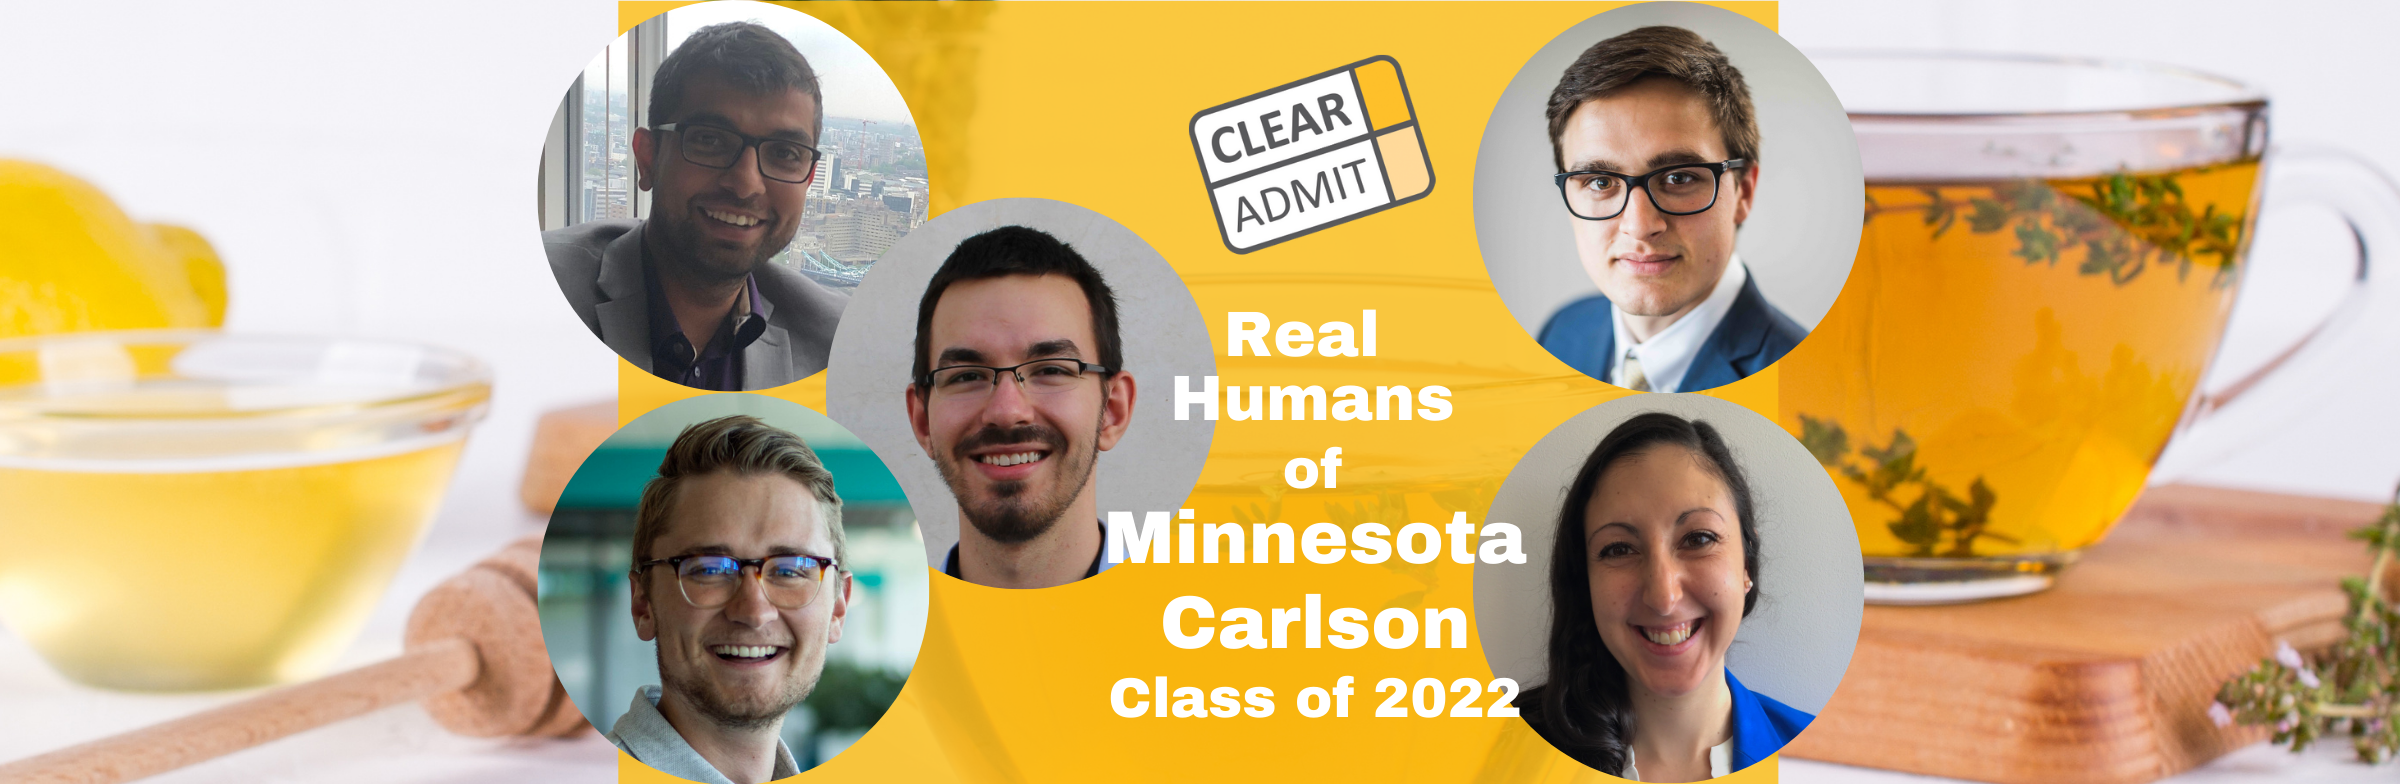 Image for Real Humans of the University of Minnesota Carlson School of Management